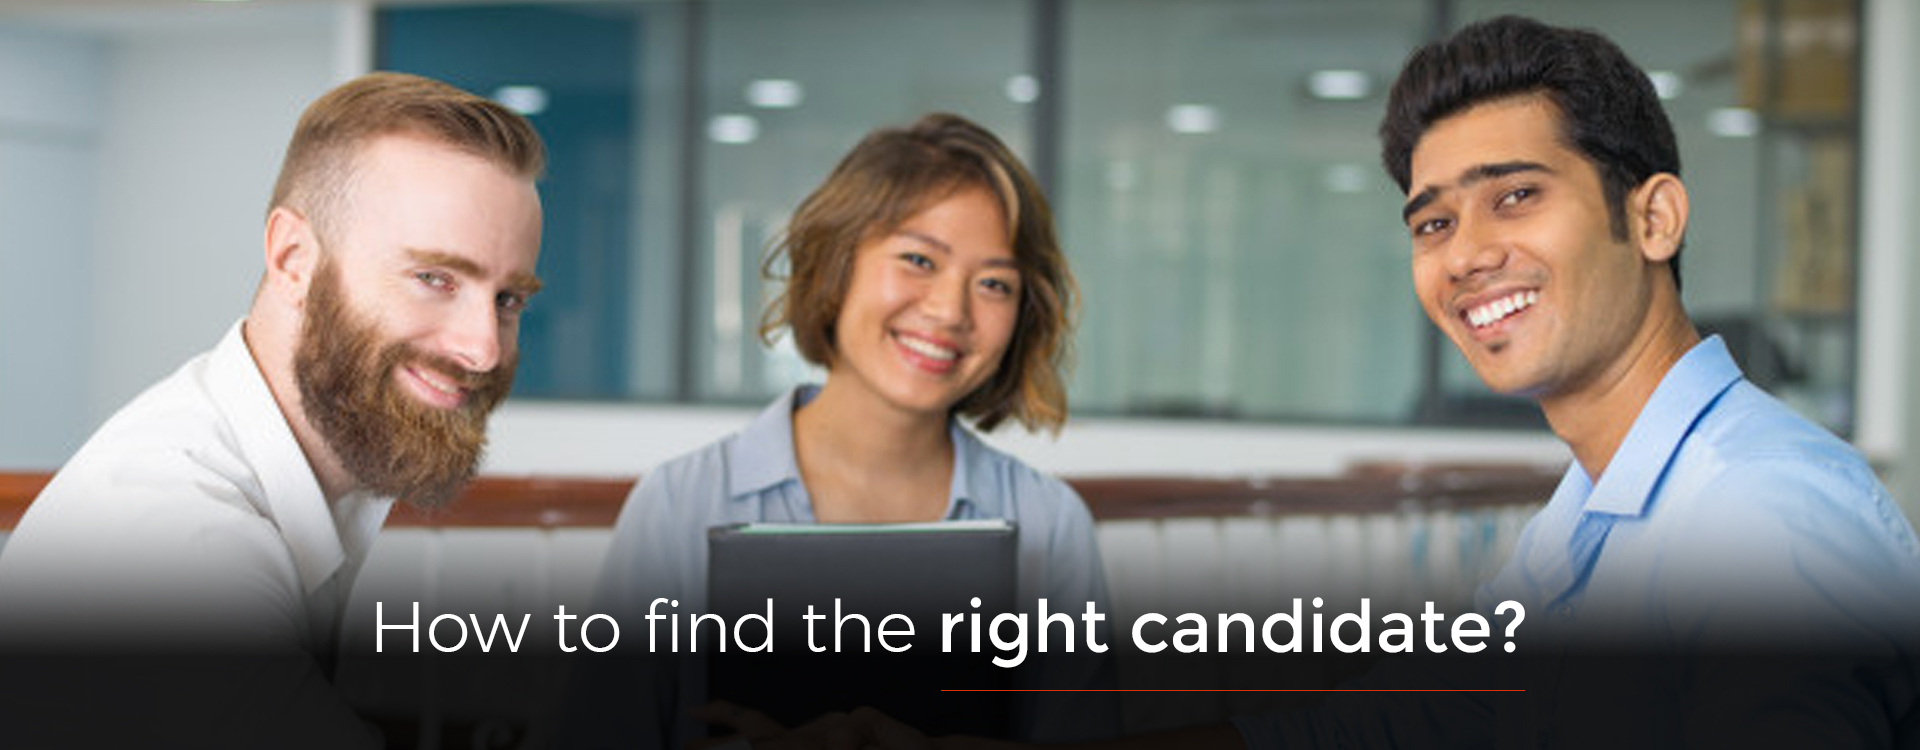 How to find the right candidate?